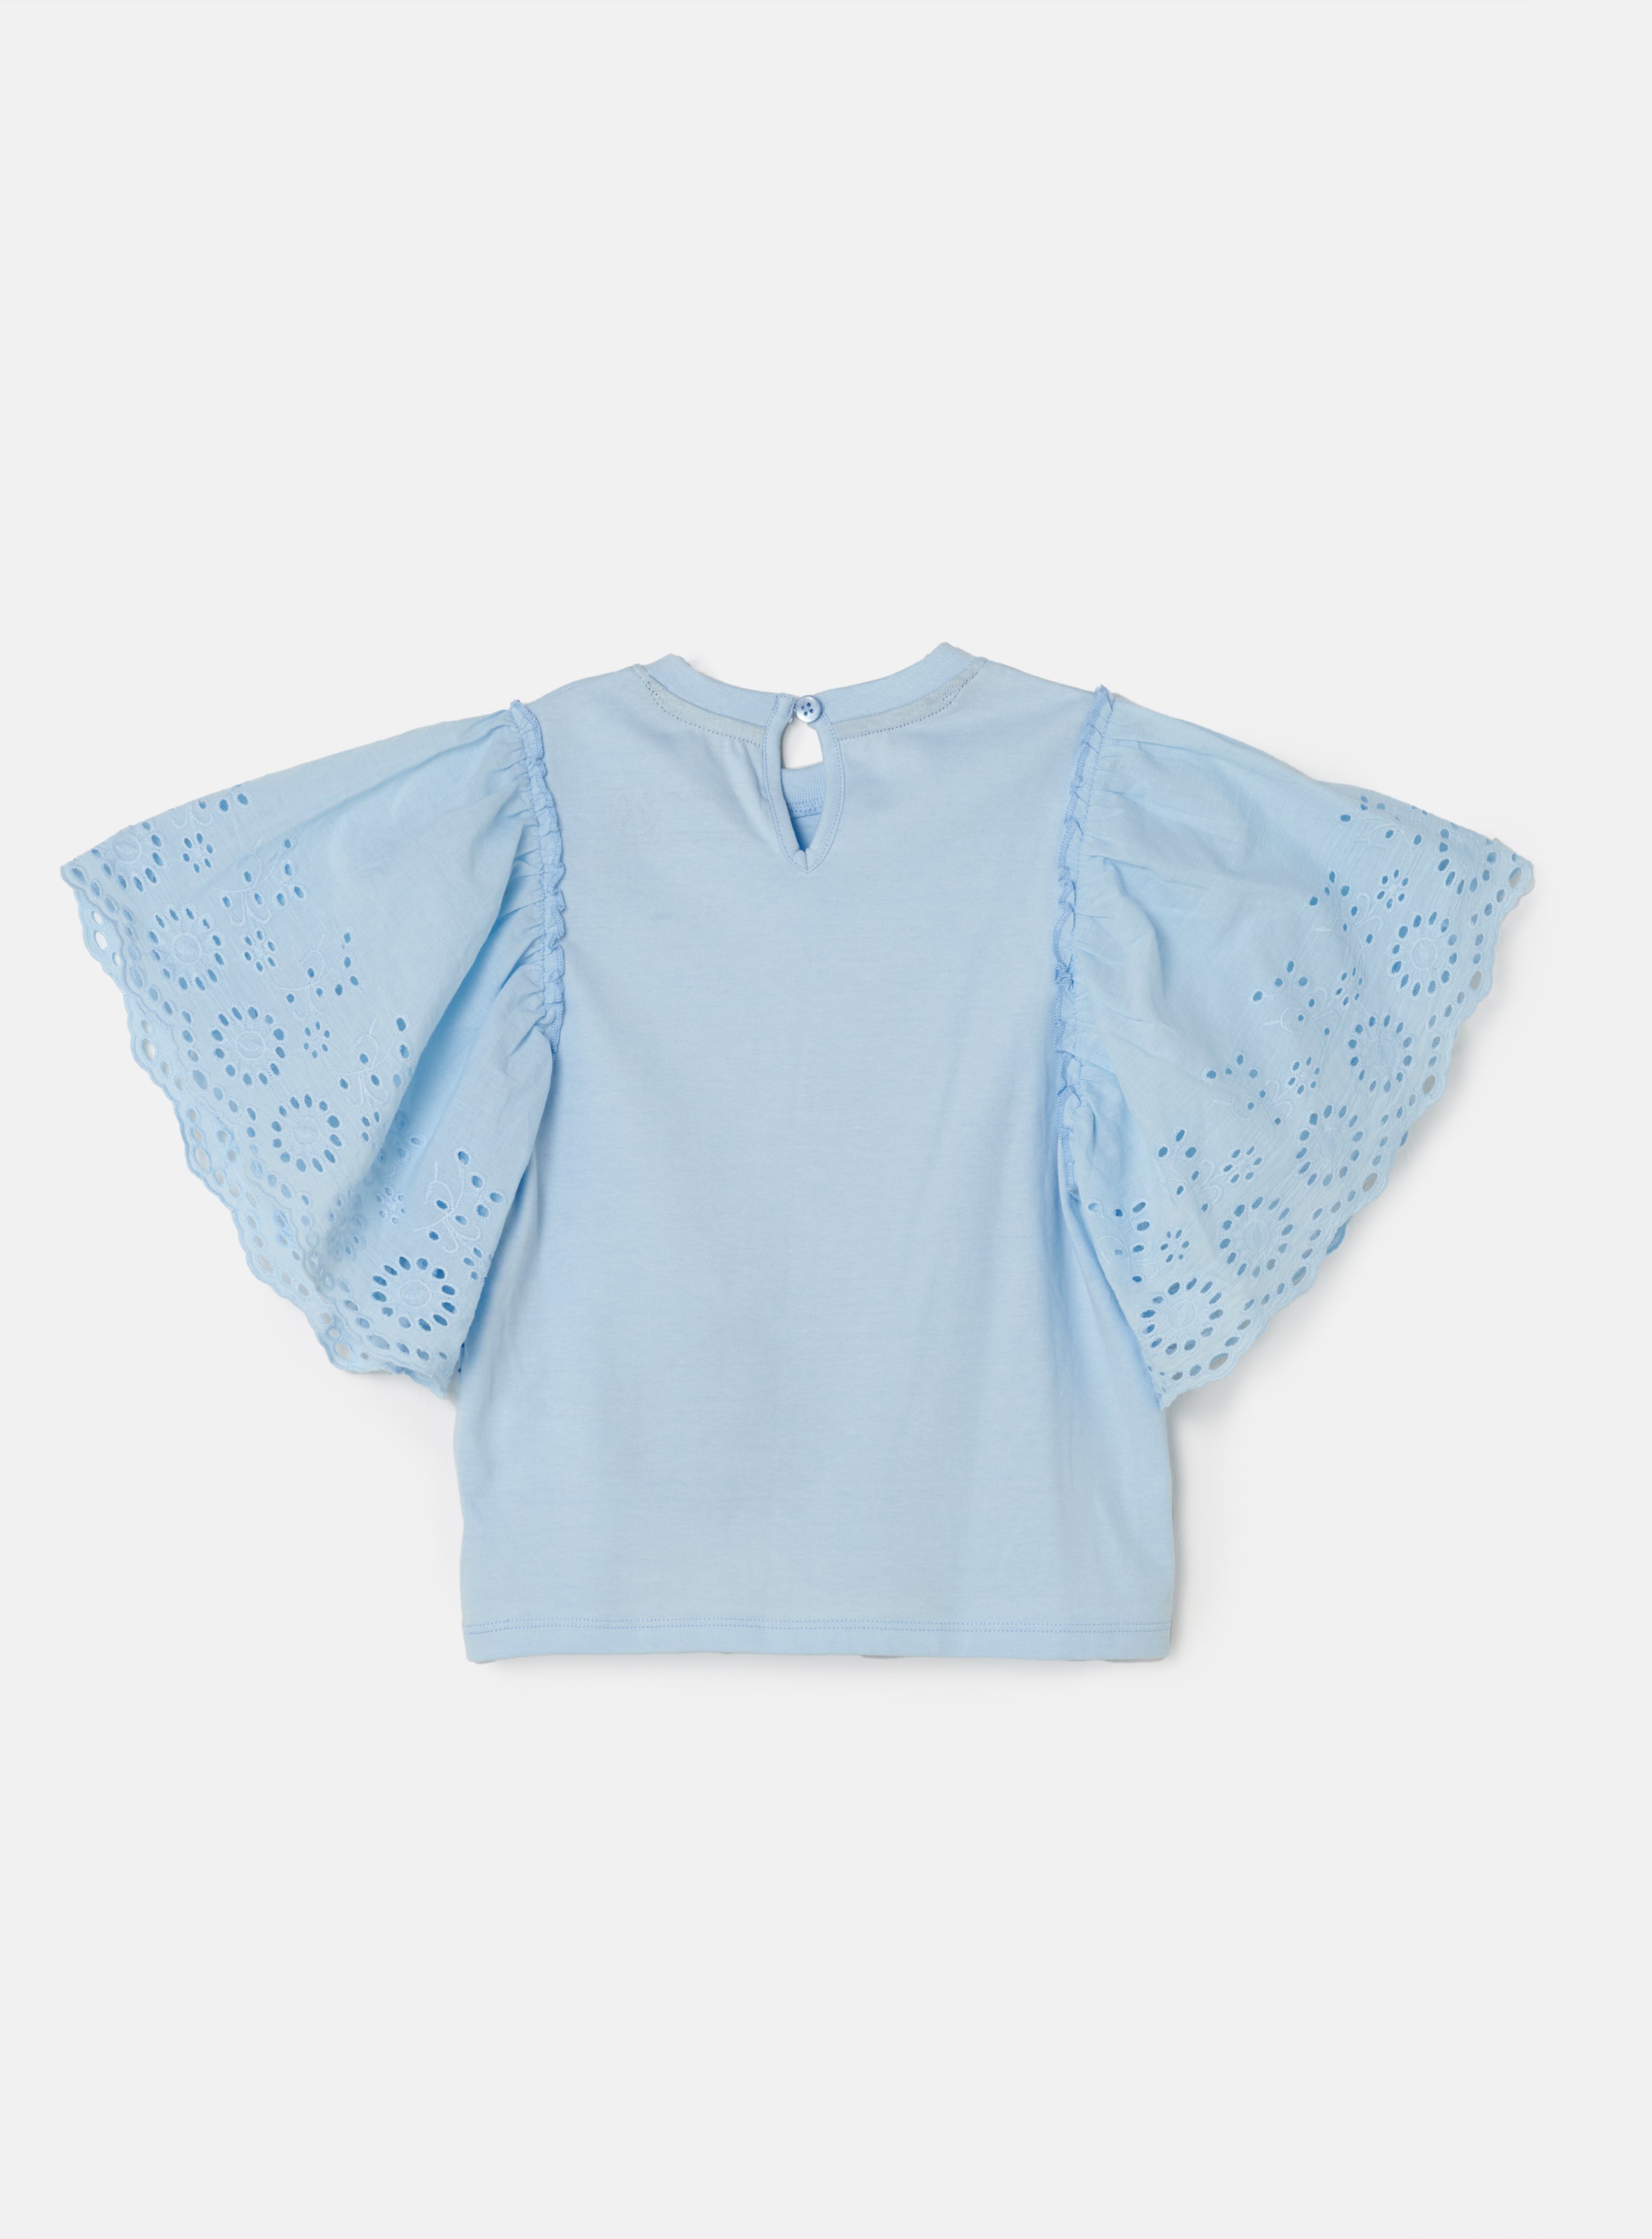 Girl Icon Printed Cotton Blue Top with Embroidered Sleeves